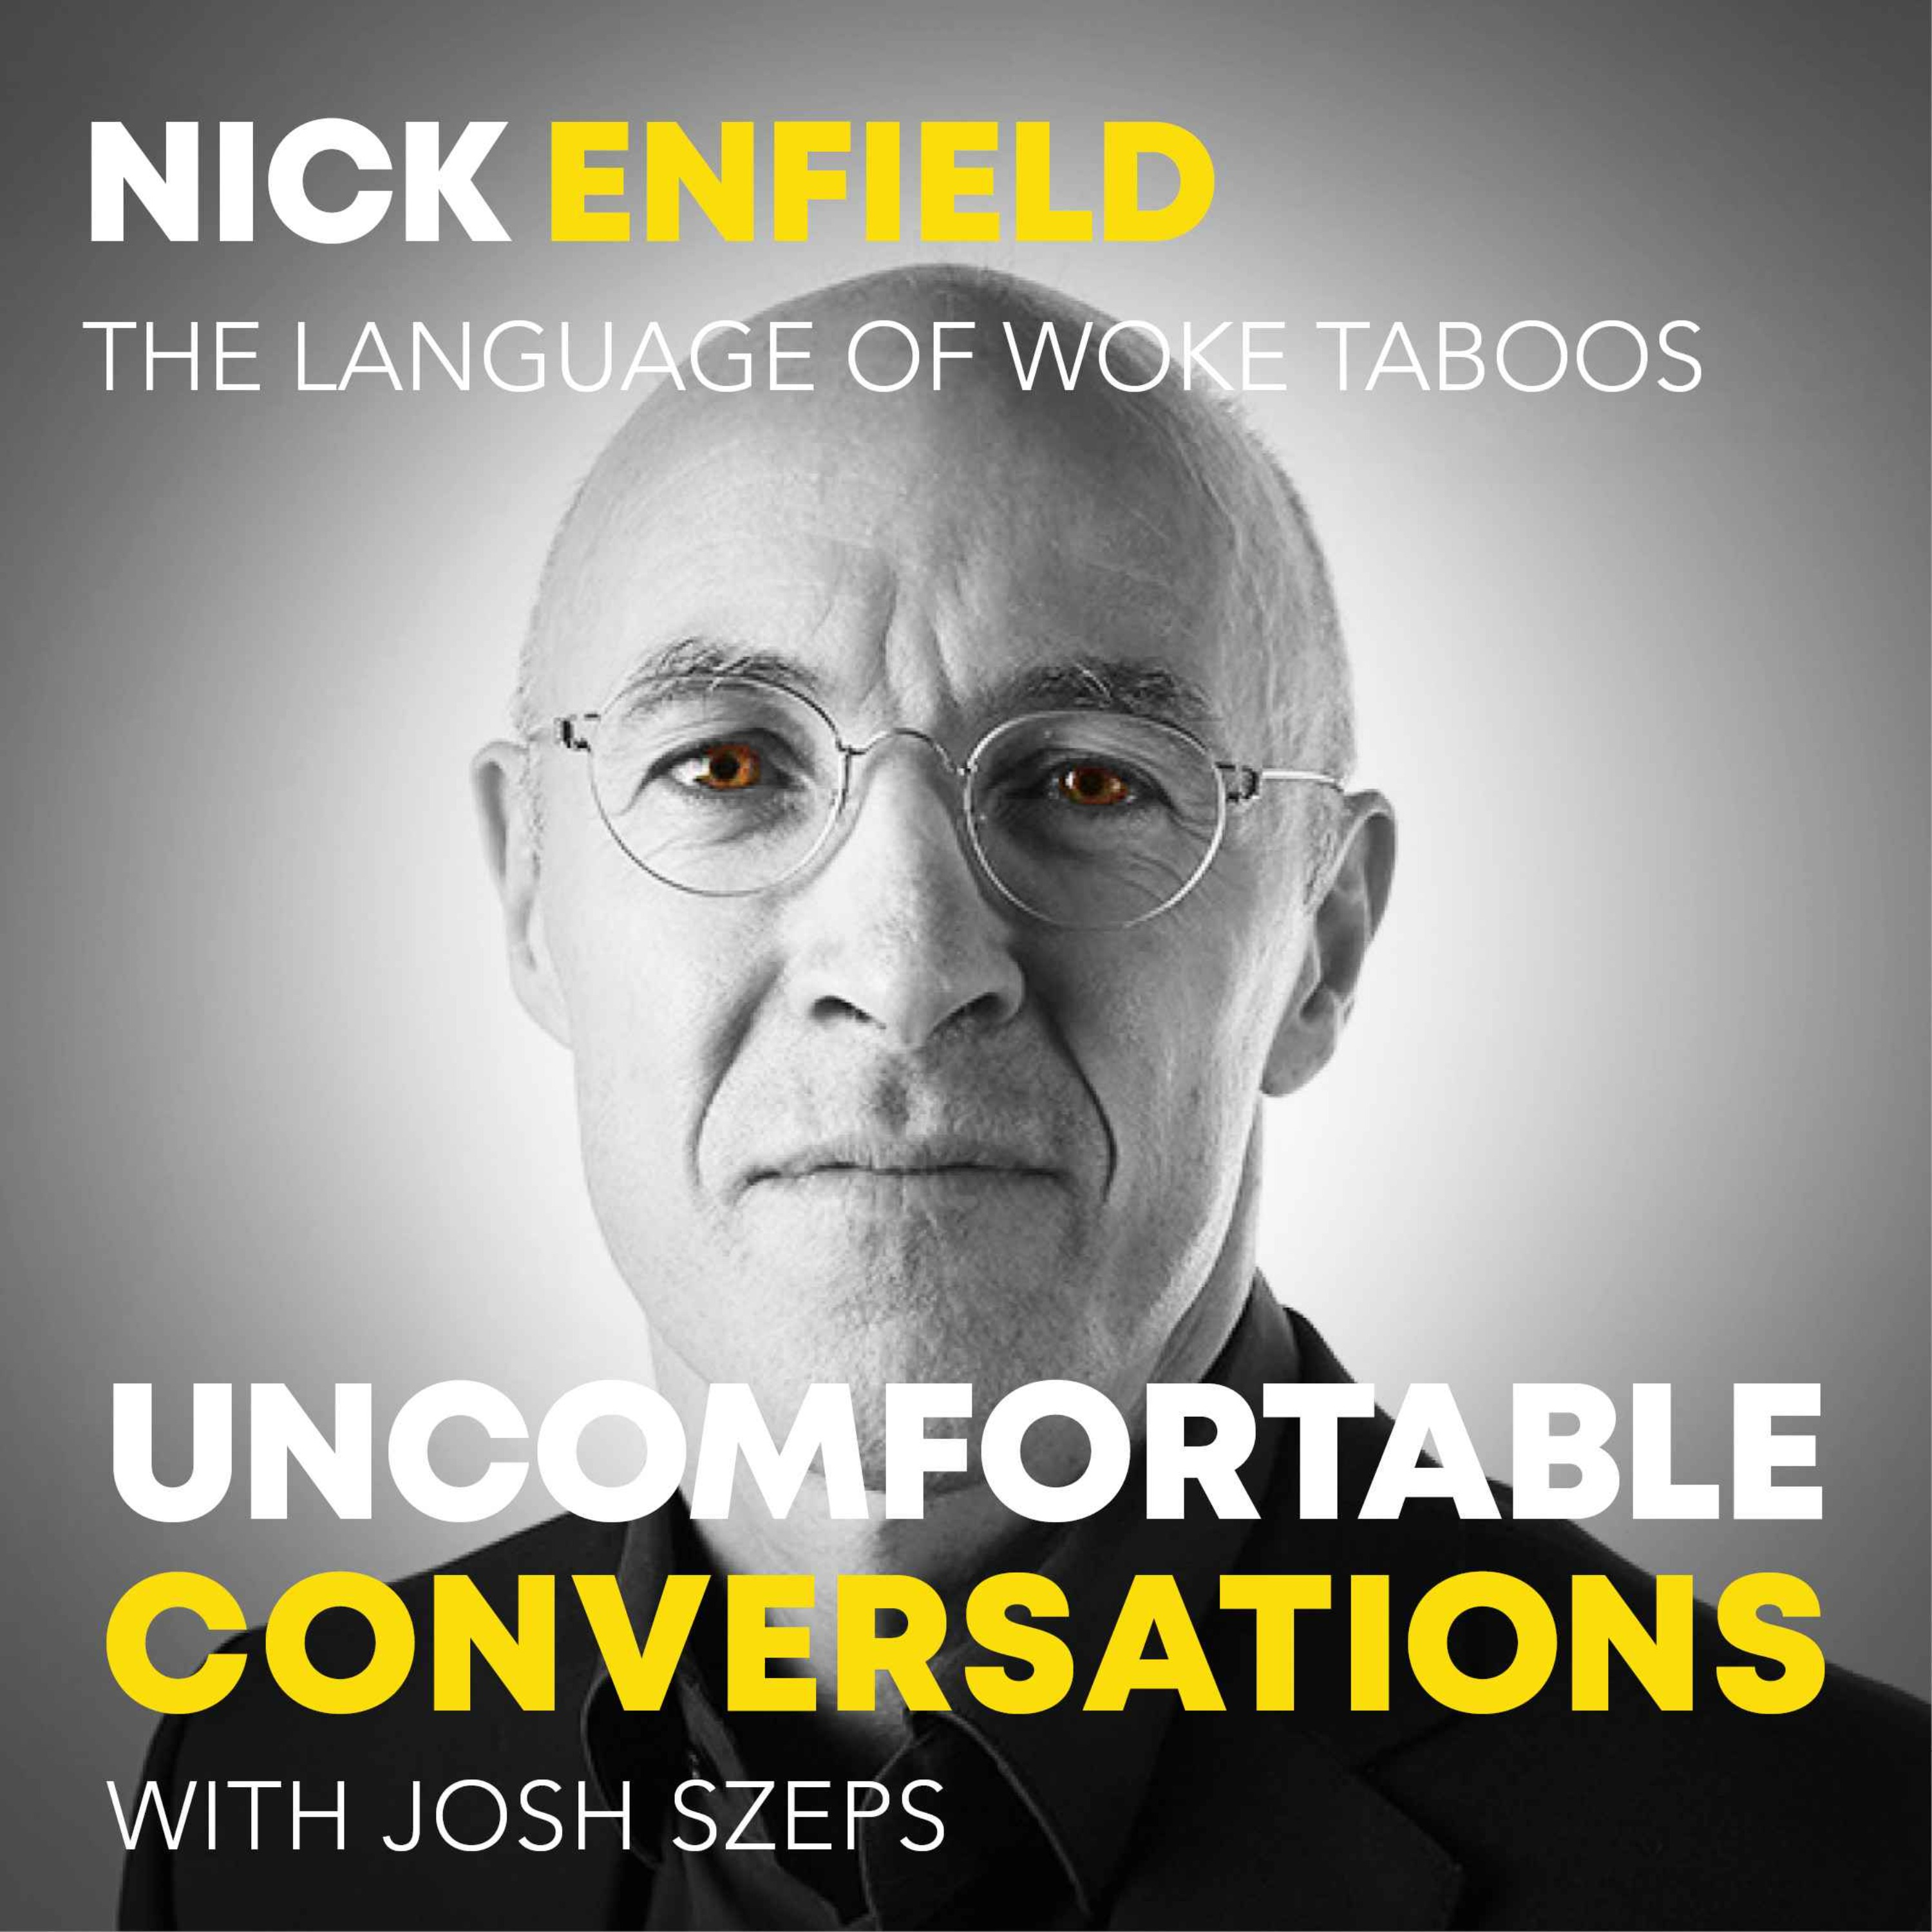 "The Language Of Woke Taboos" with Nick Enfield